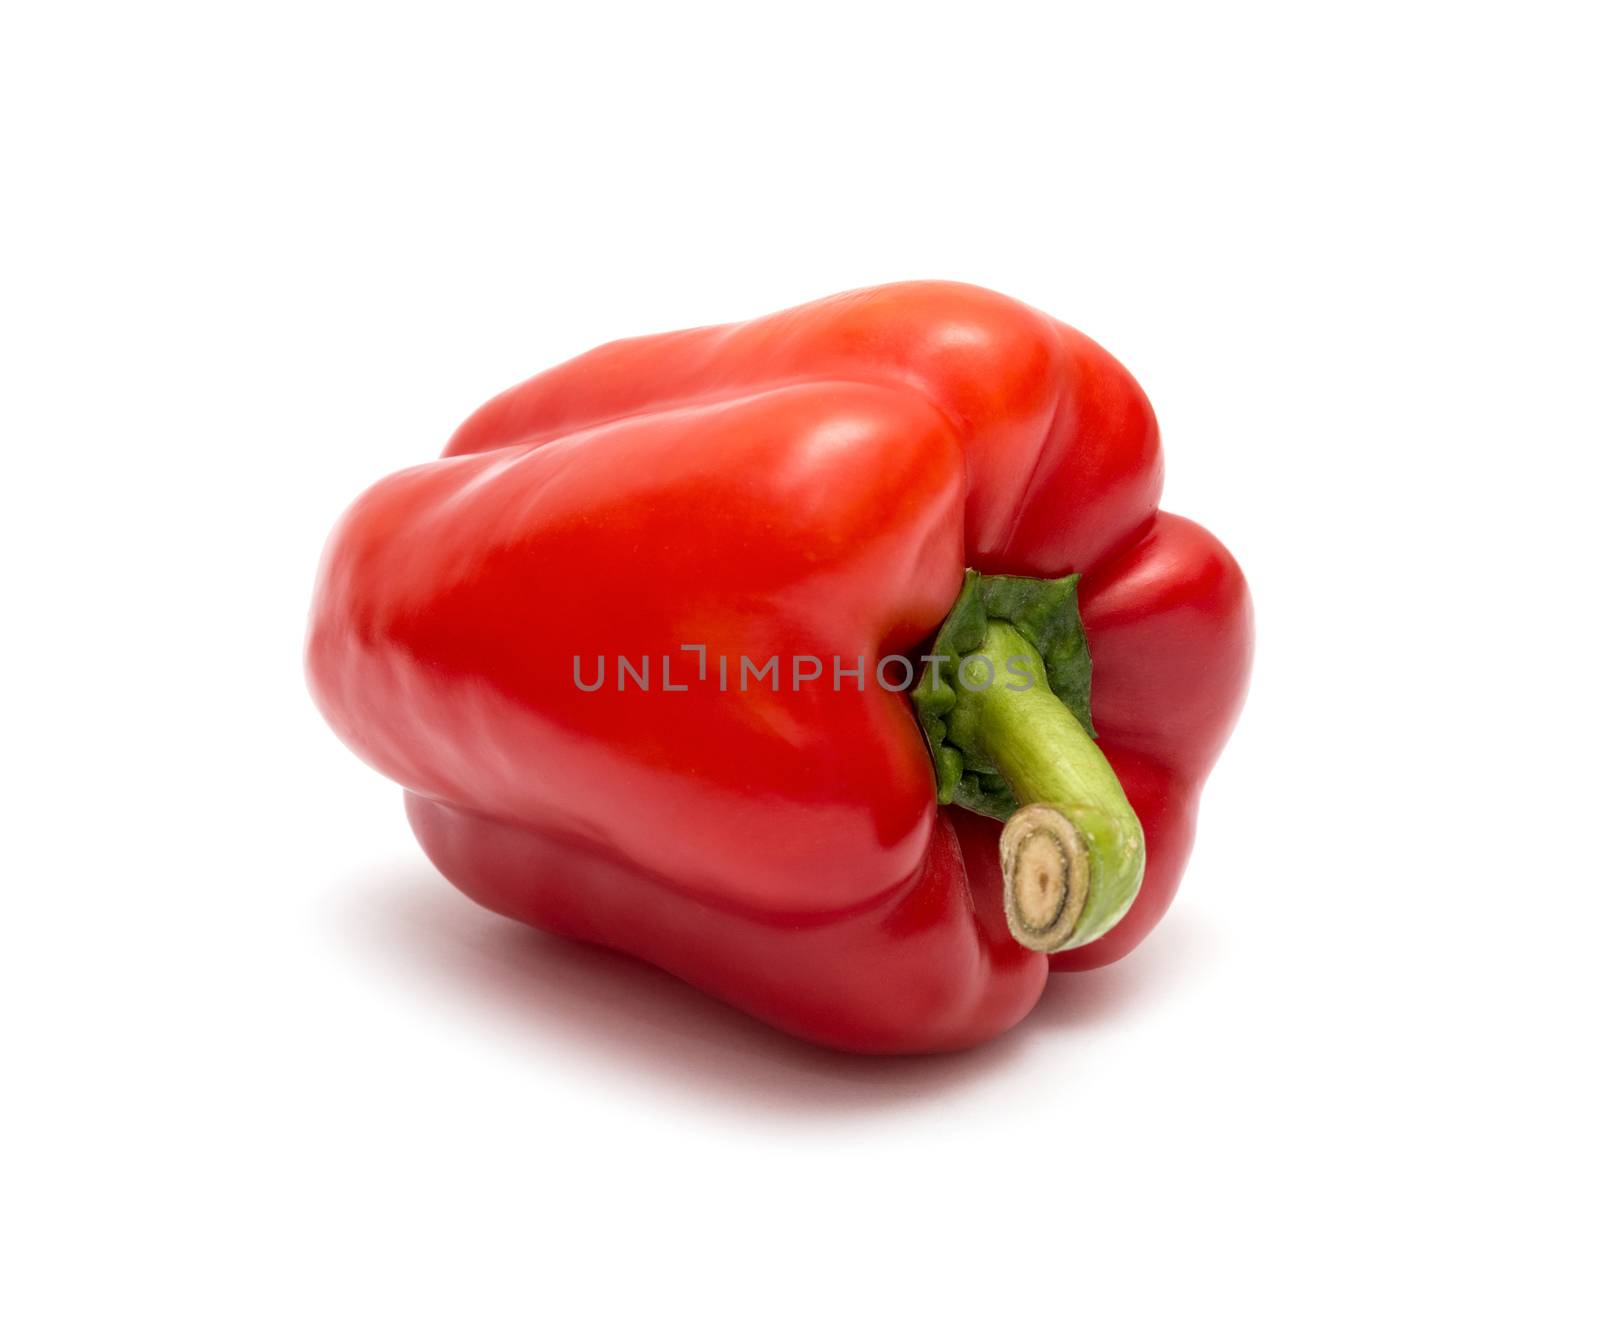 red bell pepper isolated on white background